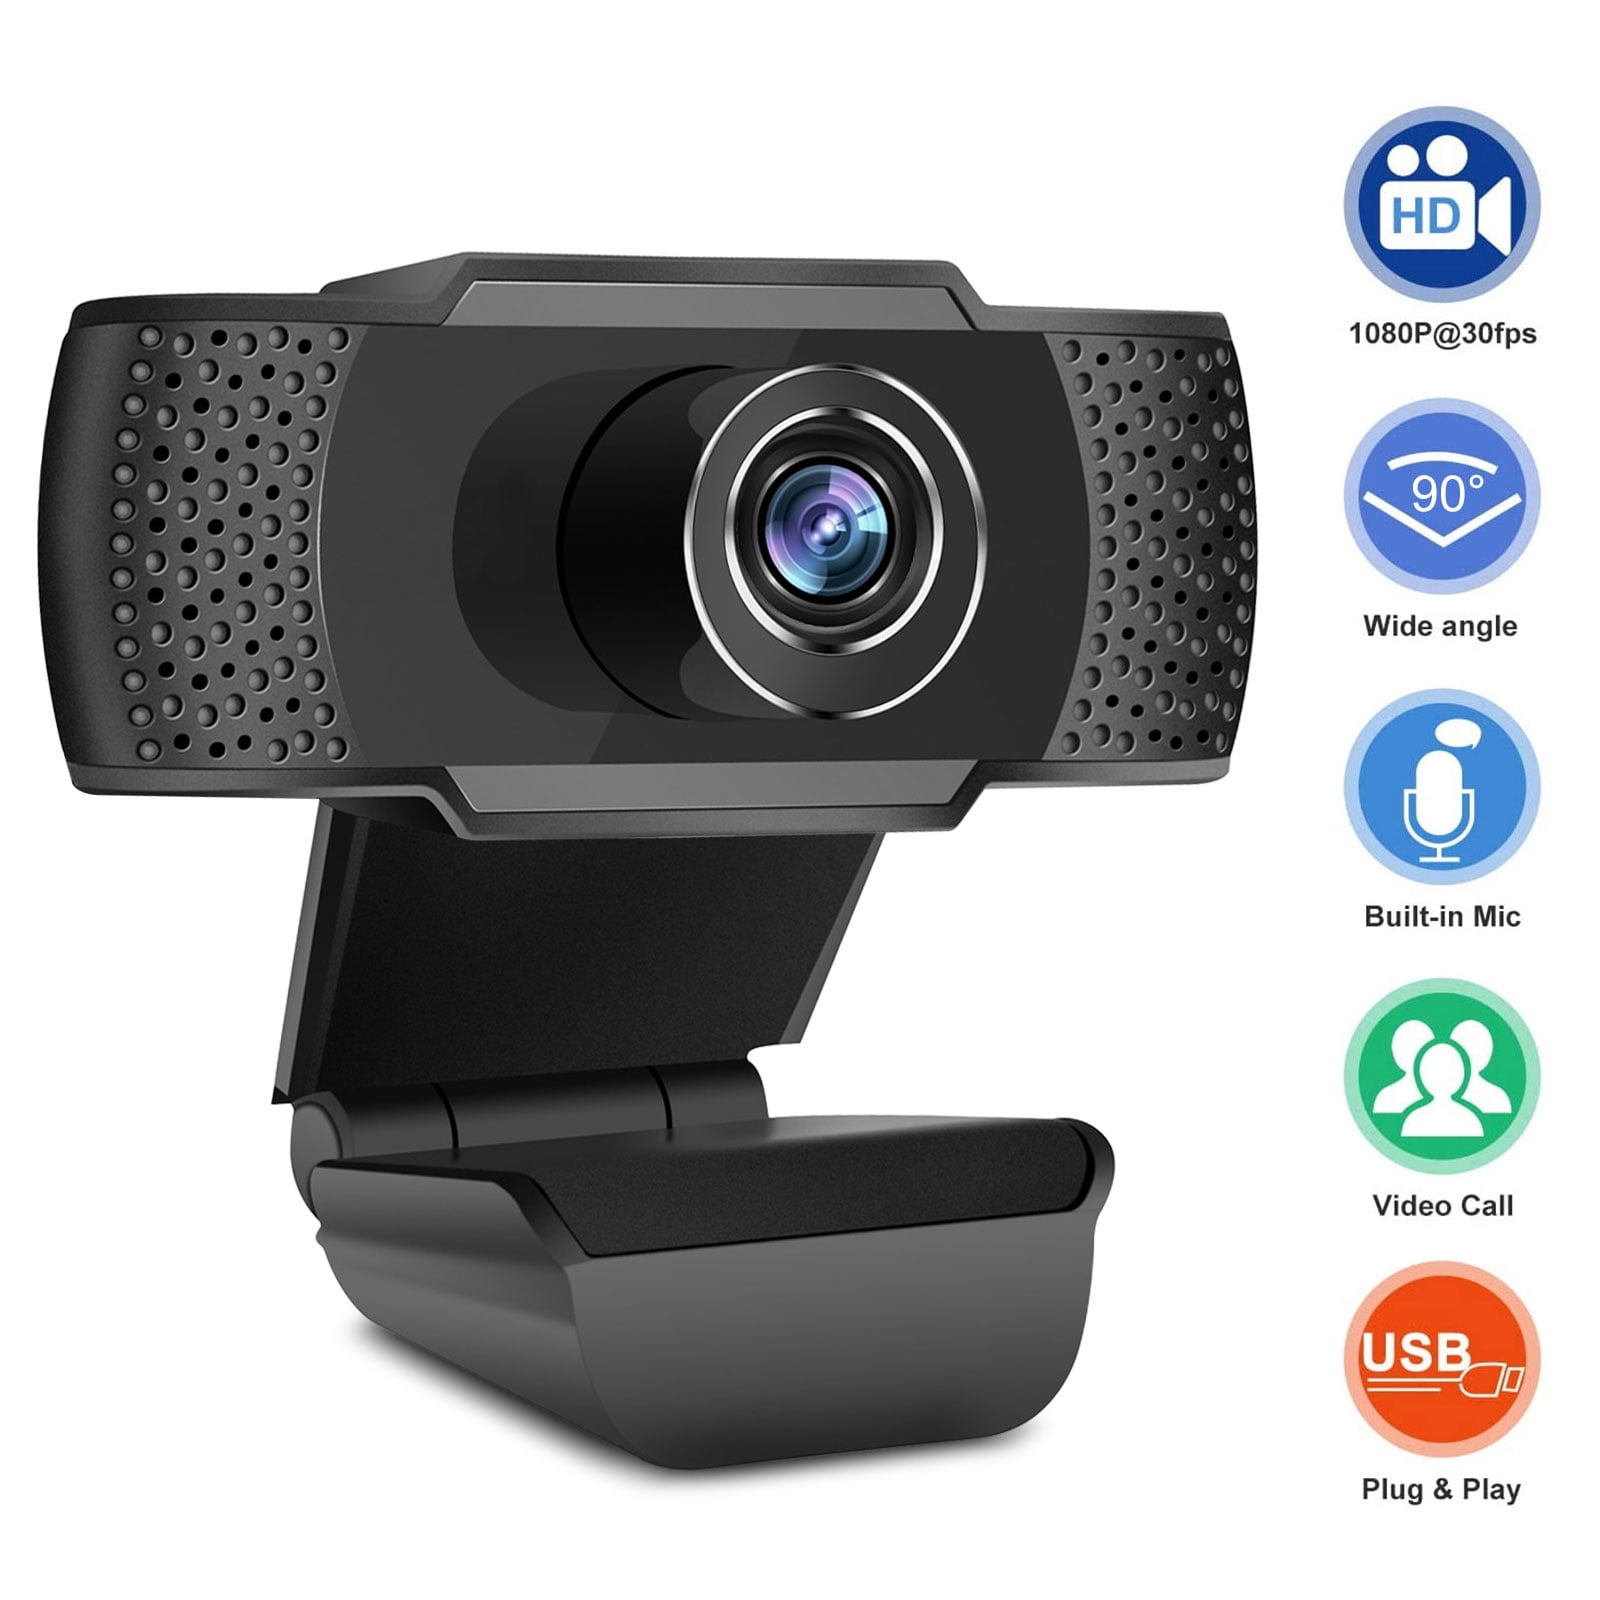 Games. Portable Cameras HD Webcam 1080P with Microphone,Fast Autofocus,Computer Camera for Online Video Education USB PC Webcam for Video Calls conferences Recording